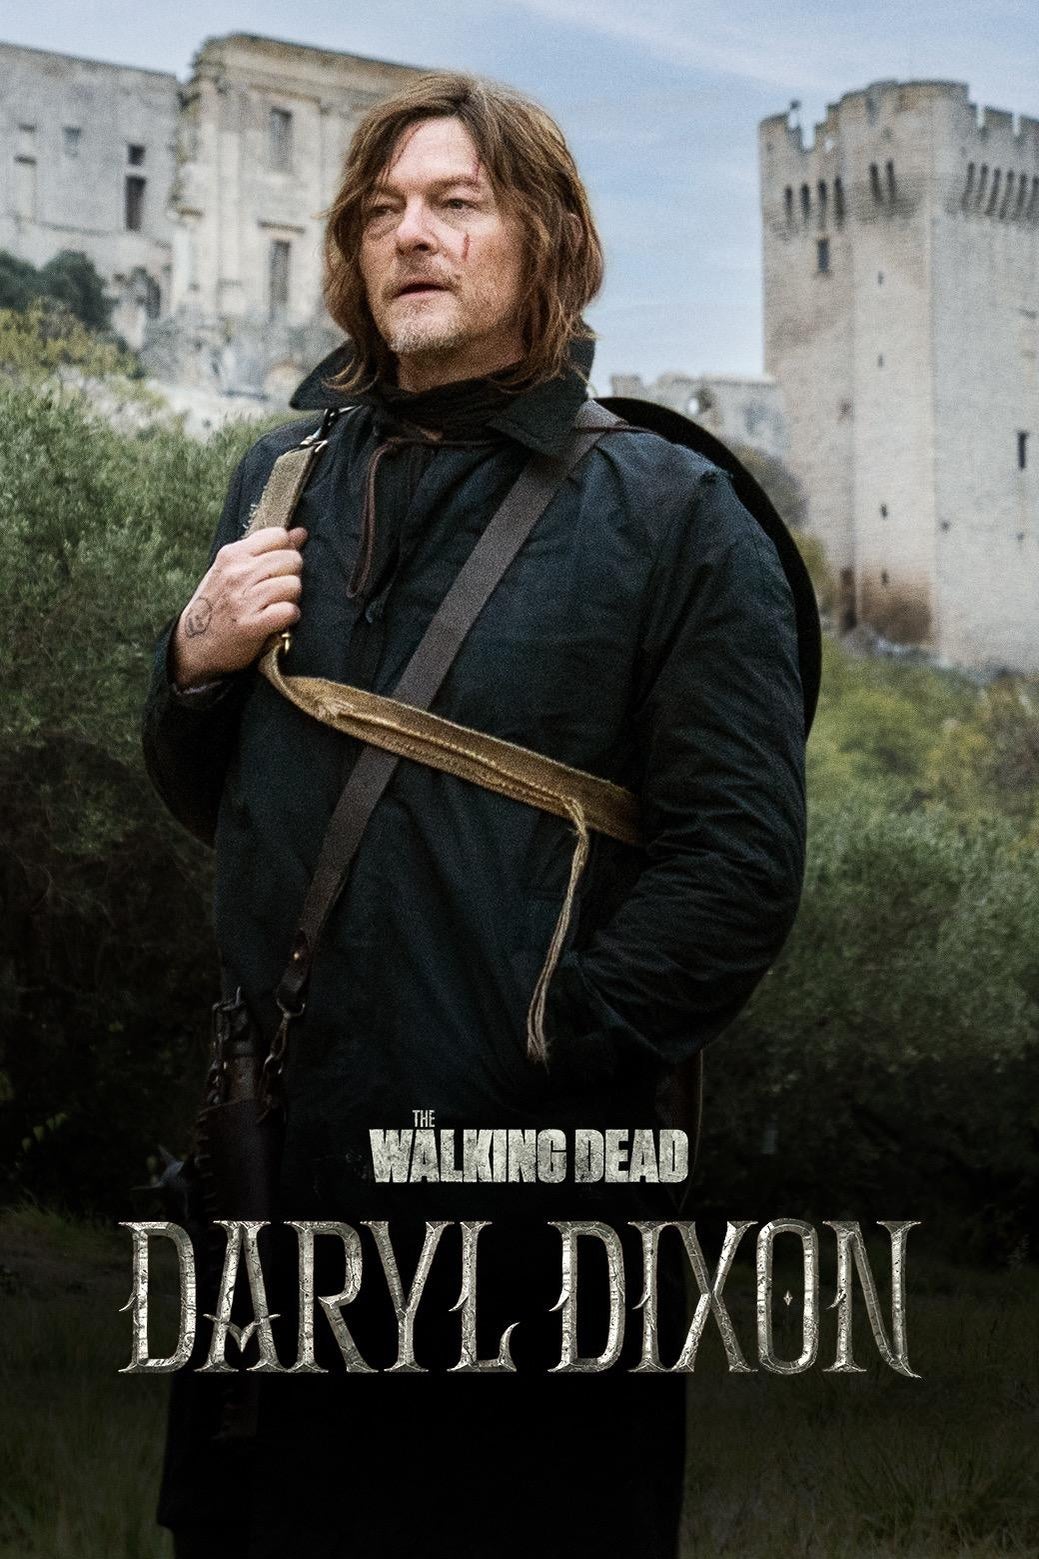 The Walking Dead: Daryl Dixon Releases Trailer and Official Poster